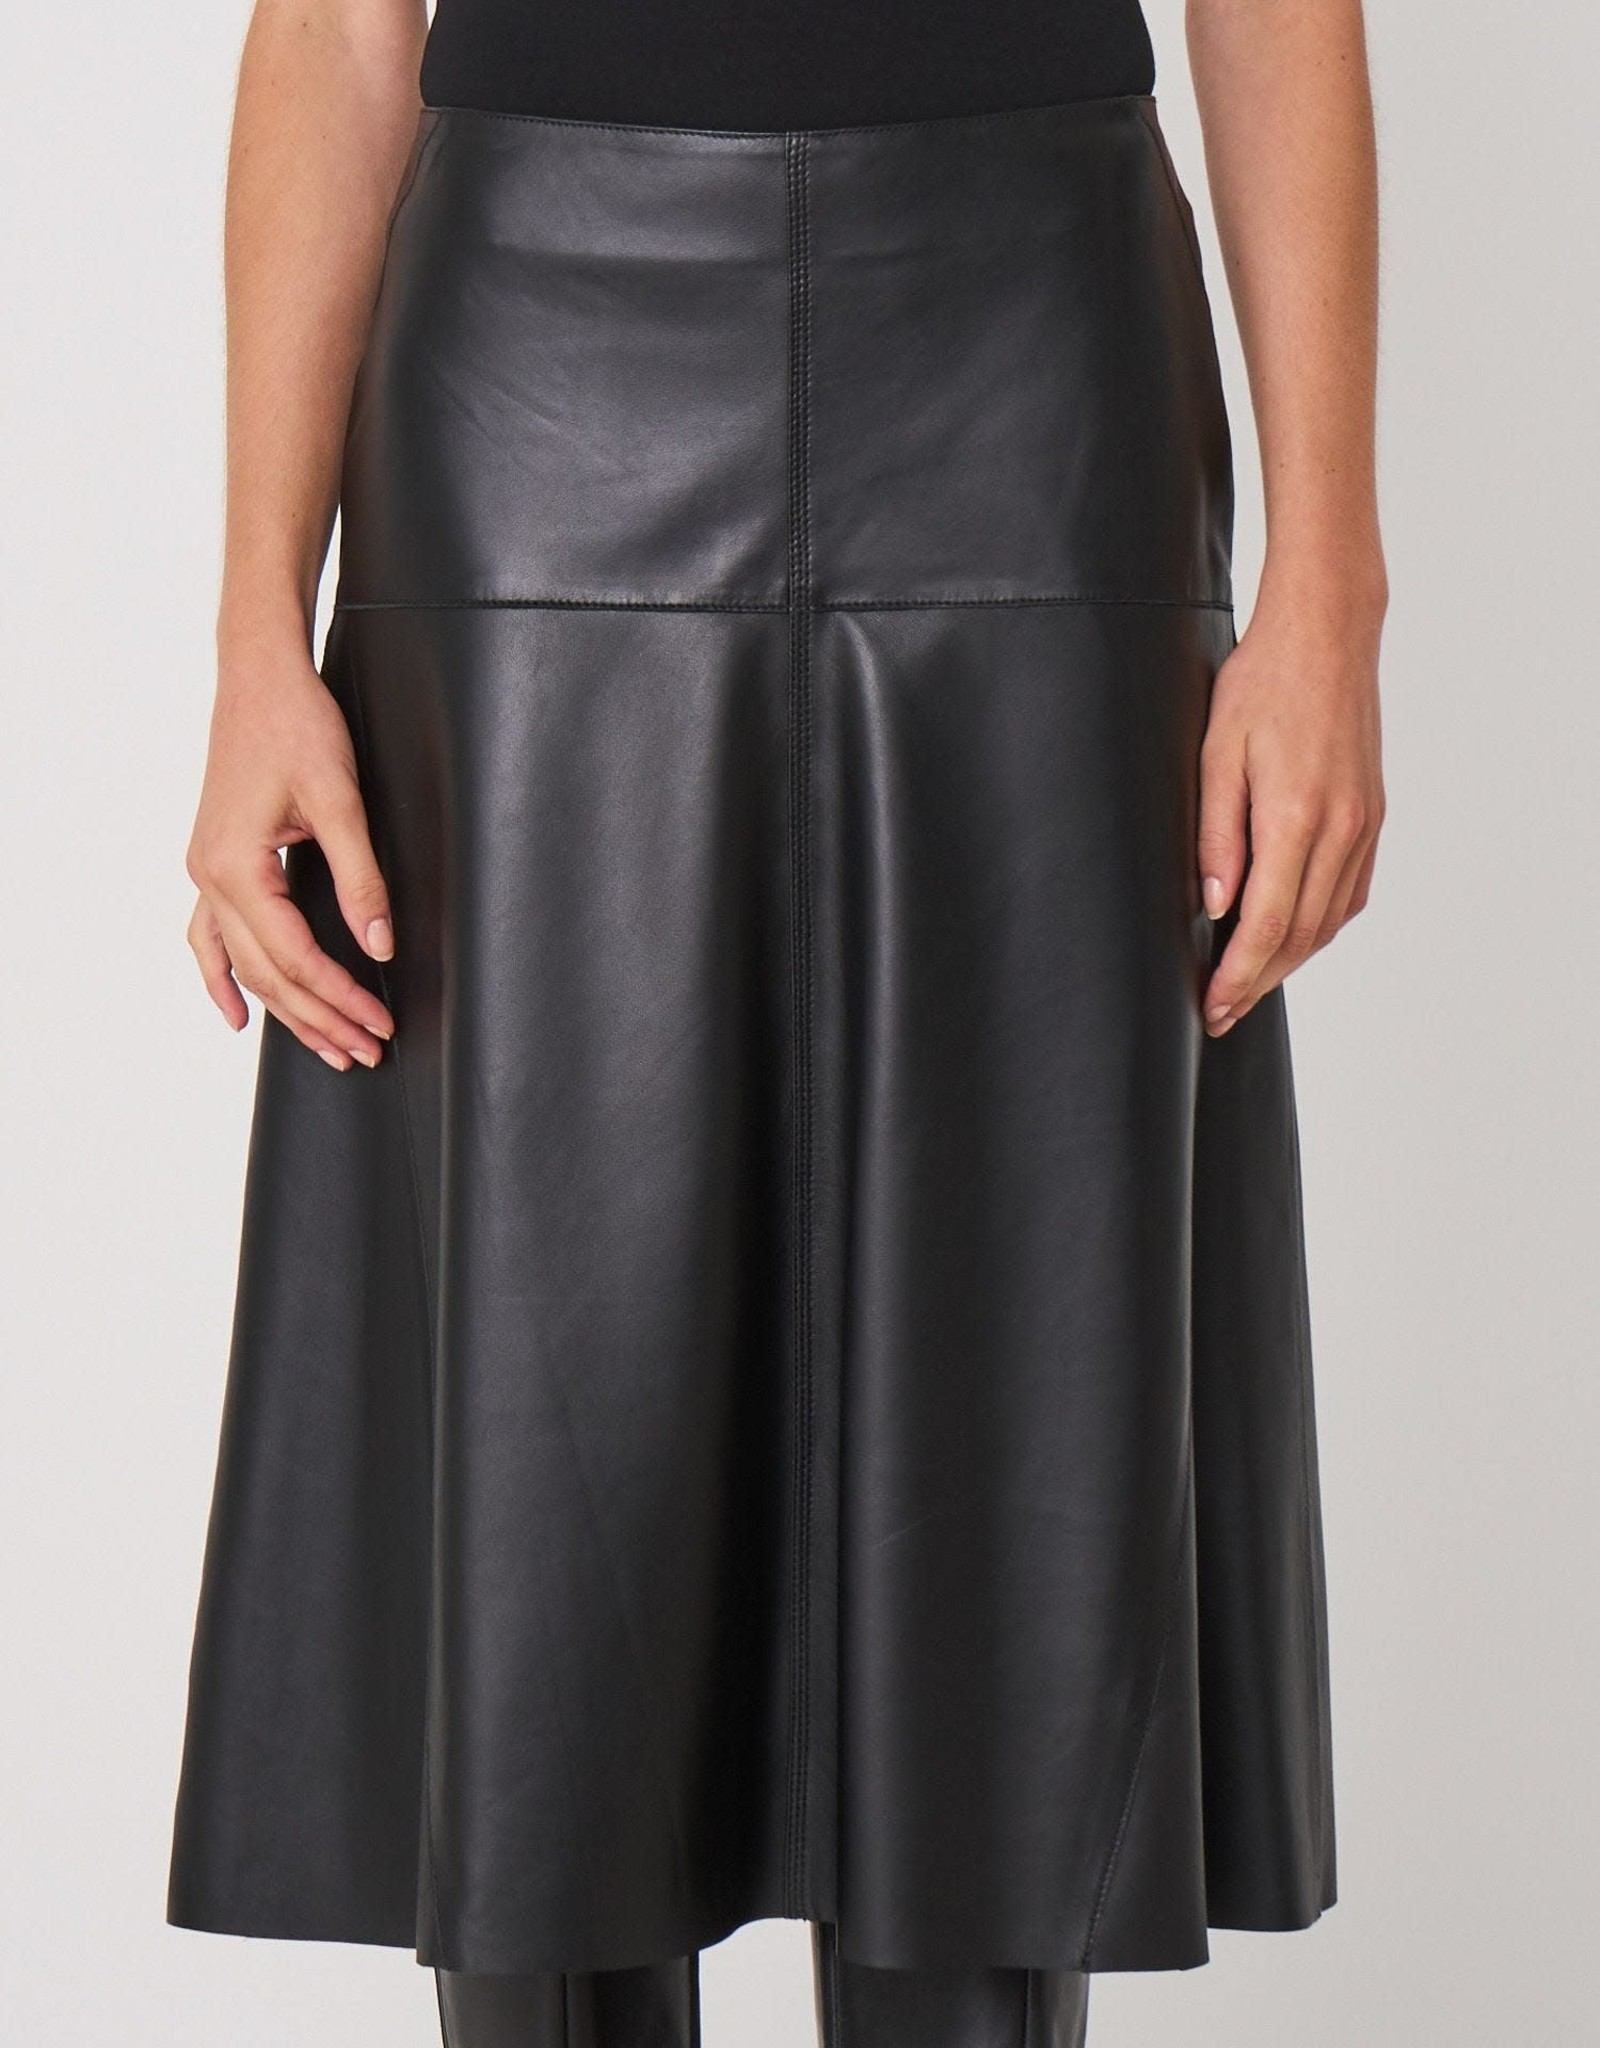 REPEAT CASHMERE 800120 Leather Skirt